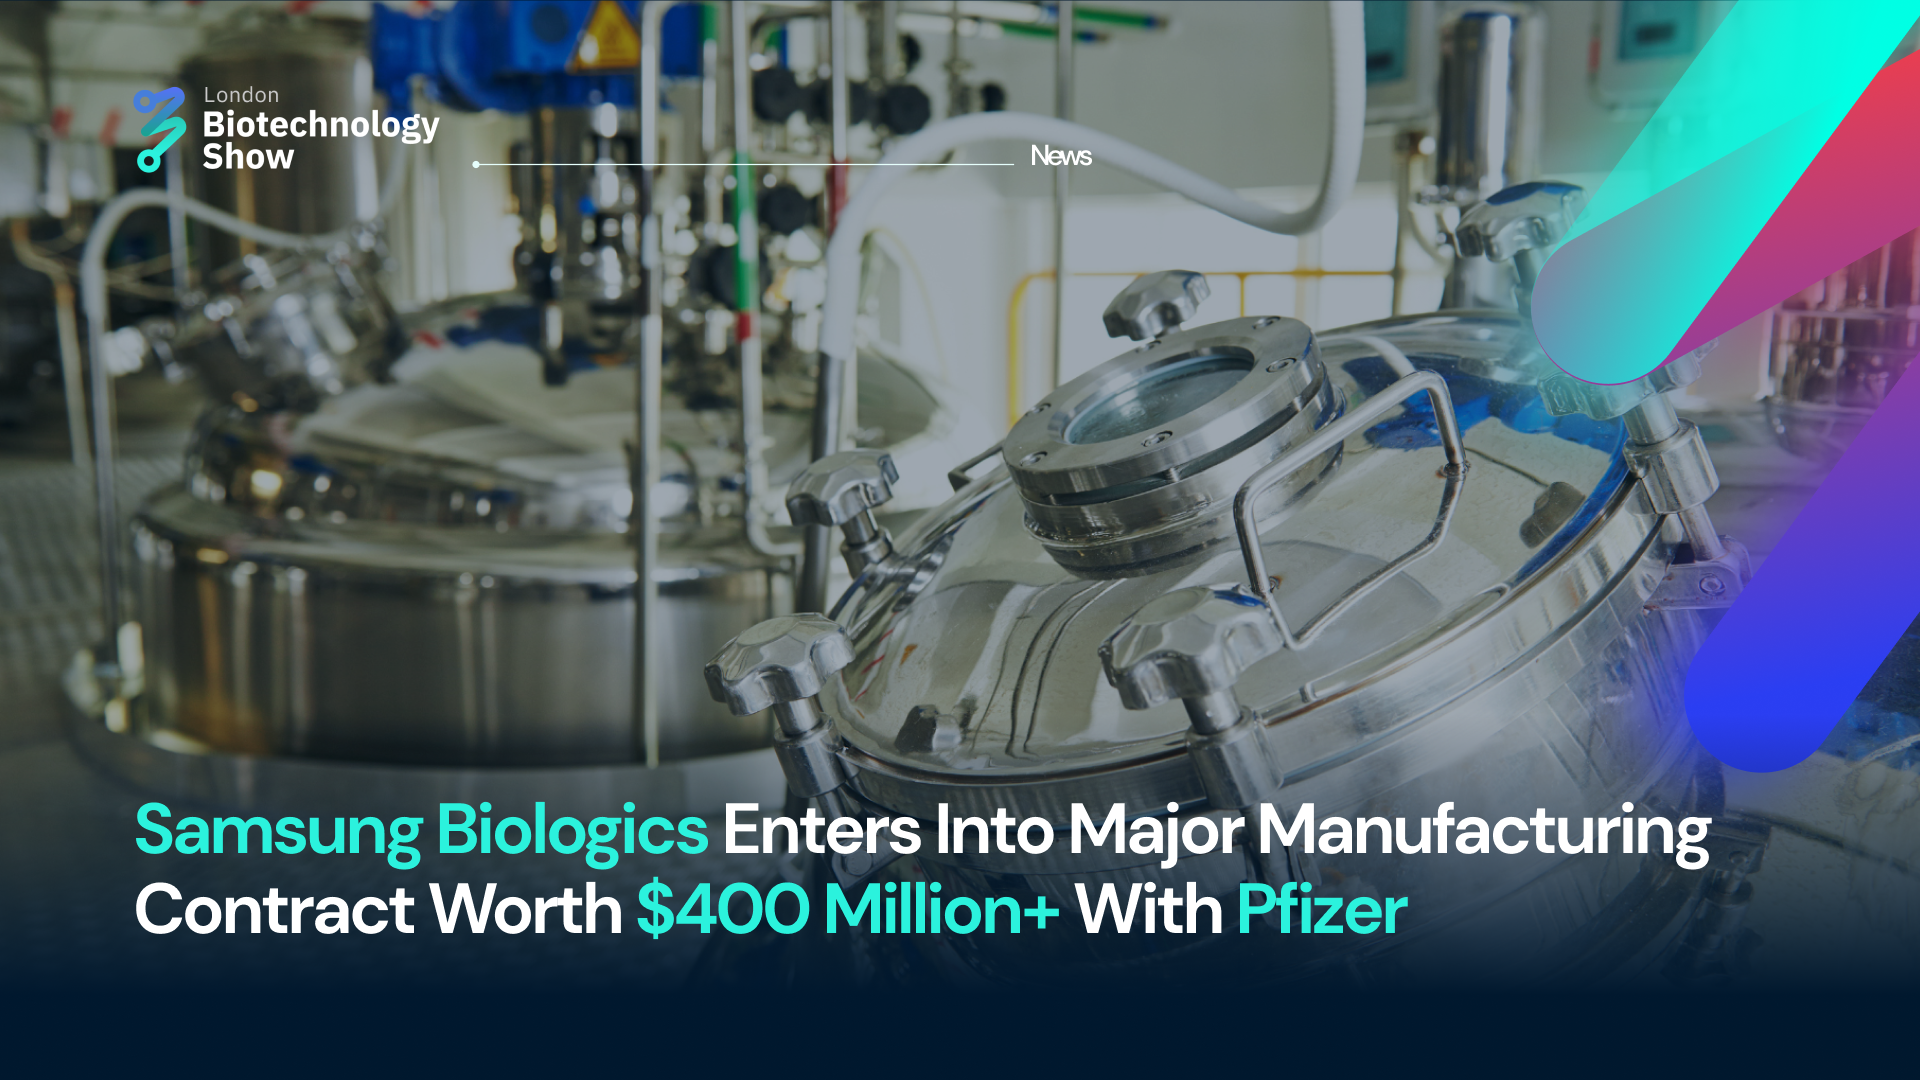 Samsung Biologics Enters Into Major Manufacturing Contract Worth $400 Million+ With Pfizer